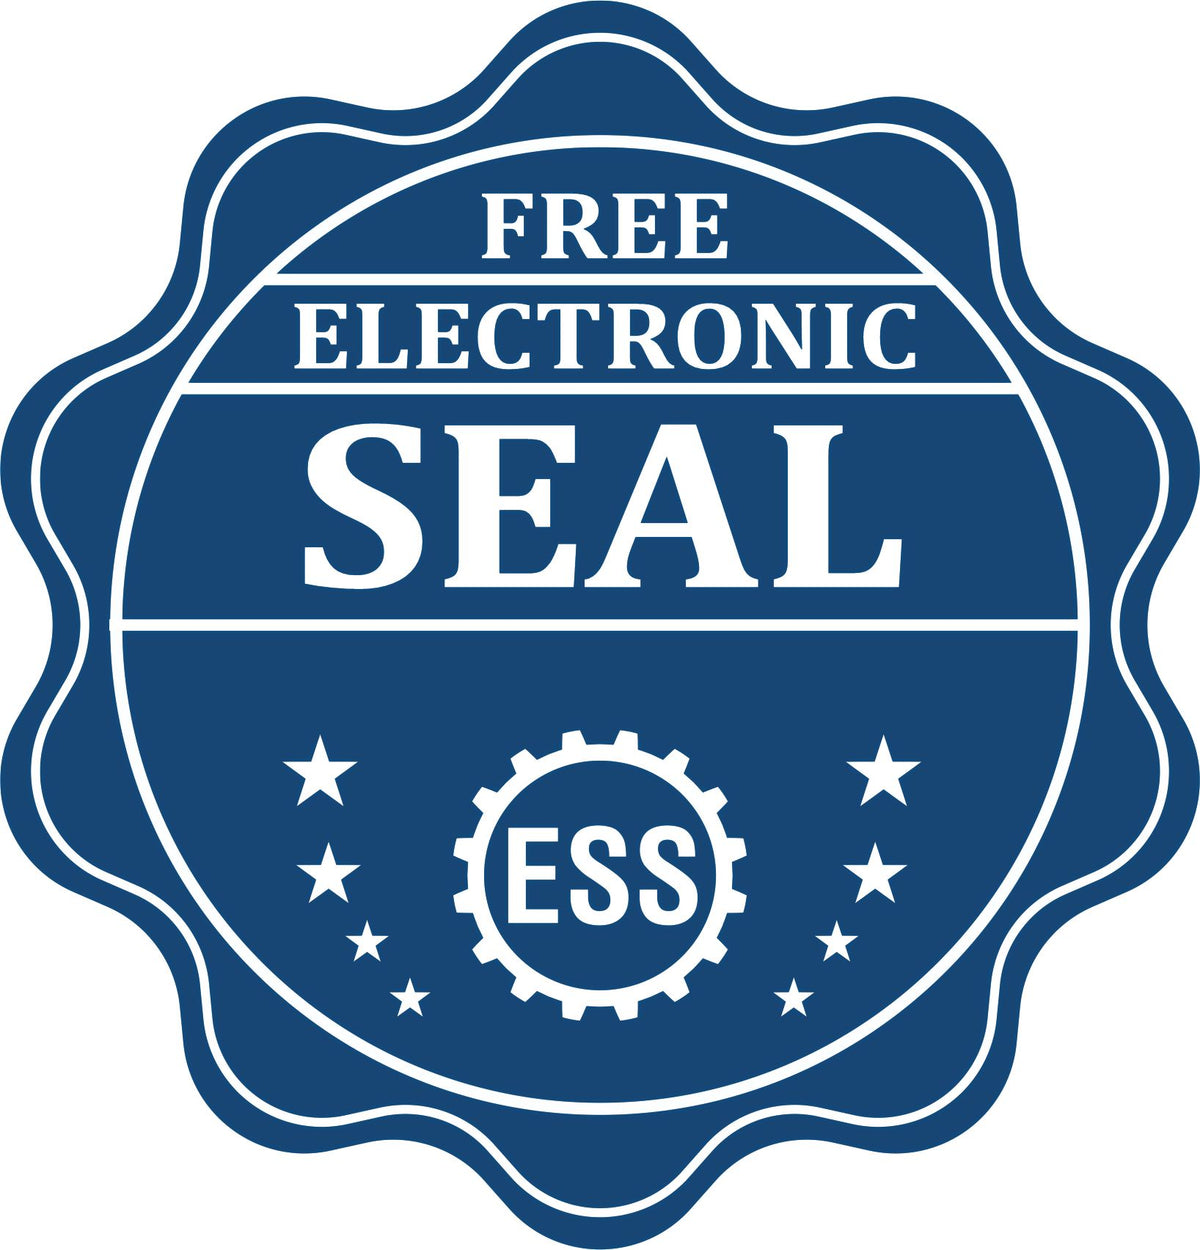 A badge showing a free electronic seal for the State of South Dakota Long Reach Architectural Embossing Seal with stars and the ESS gear on the emblem.